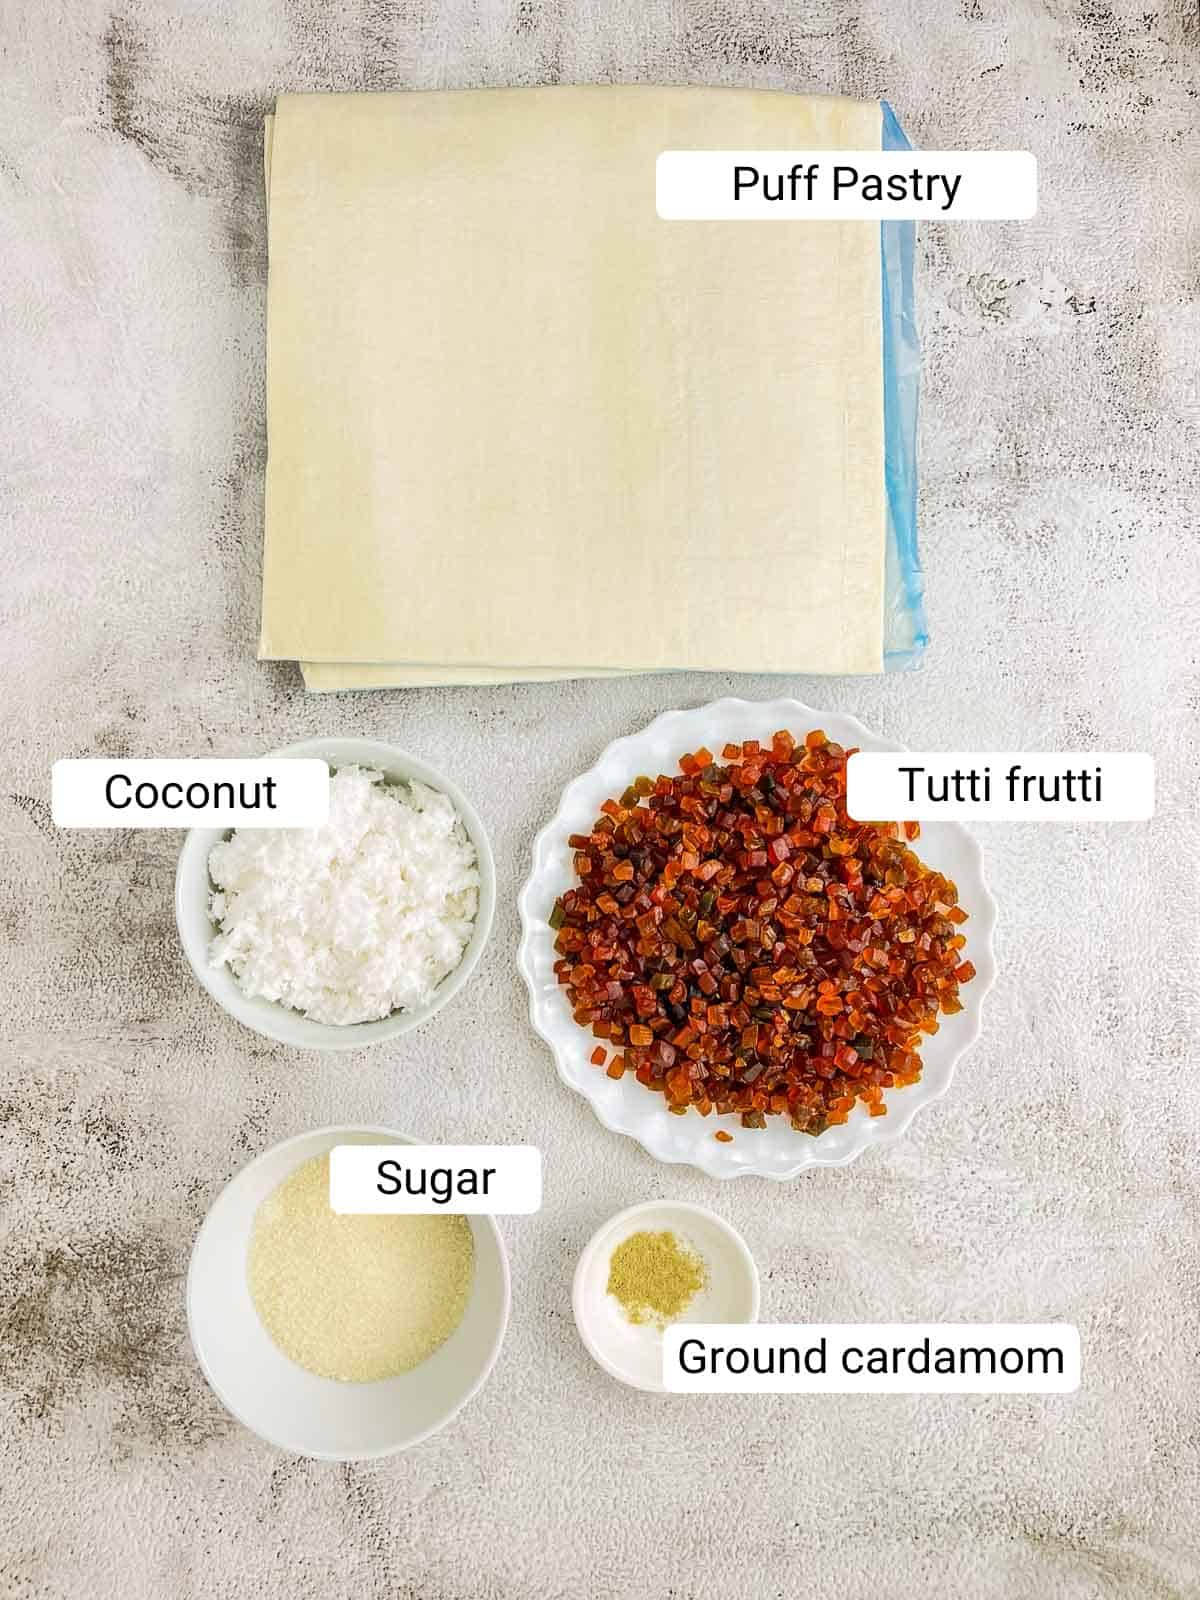 Ingredients needed to make dilpasand placed on a white surface.